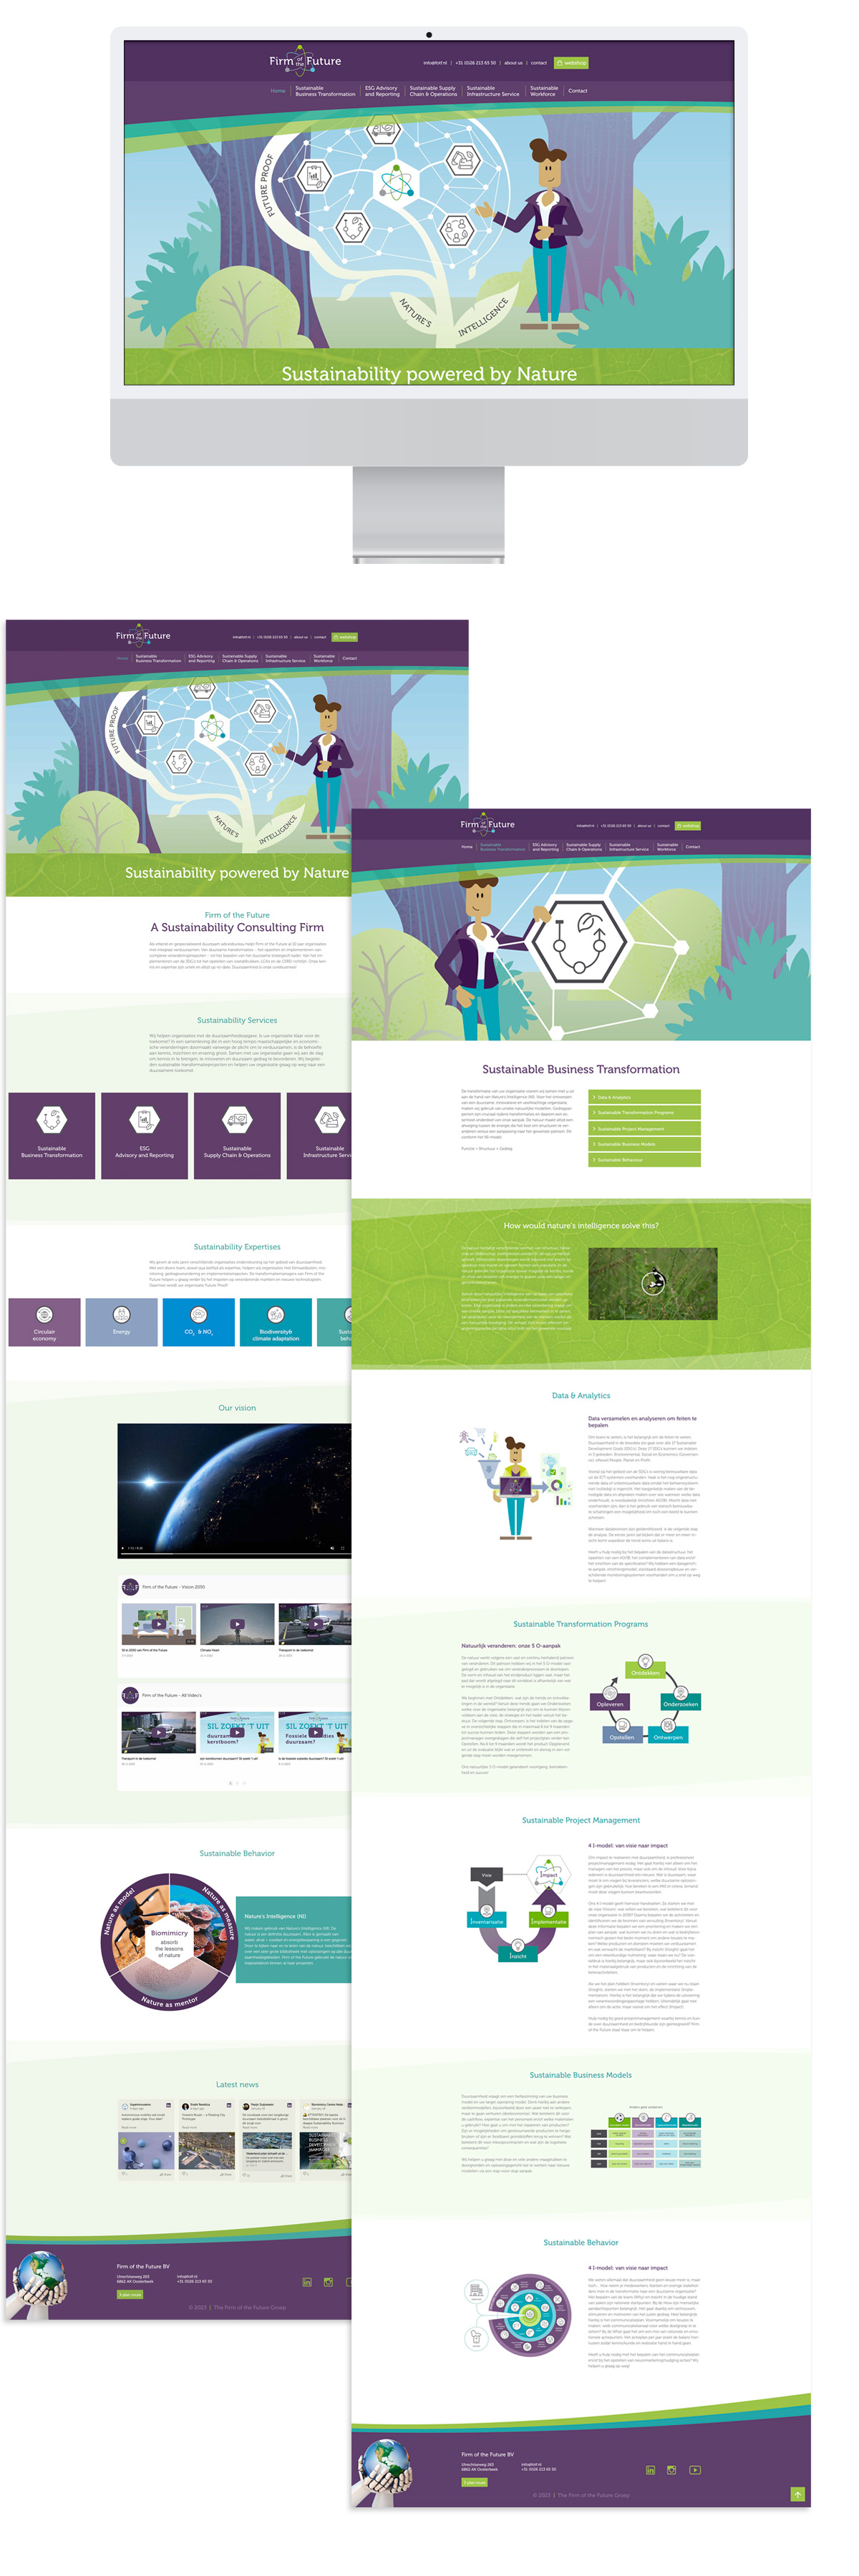 ontwerp visuals website Firm of the Future Jeanne Design